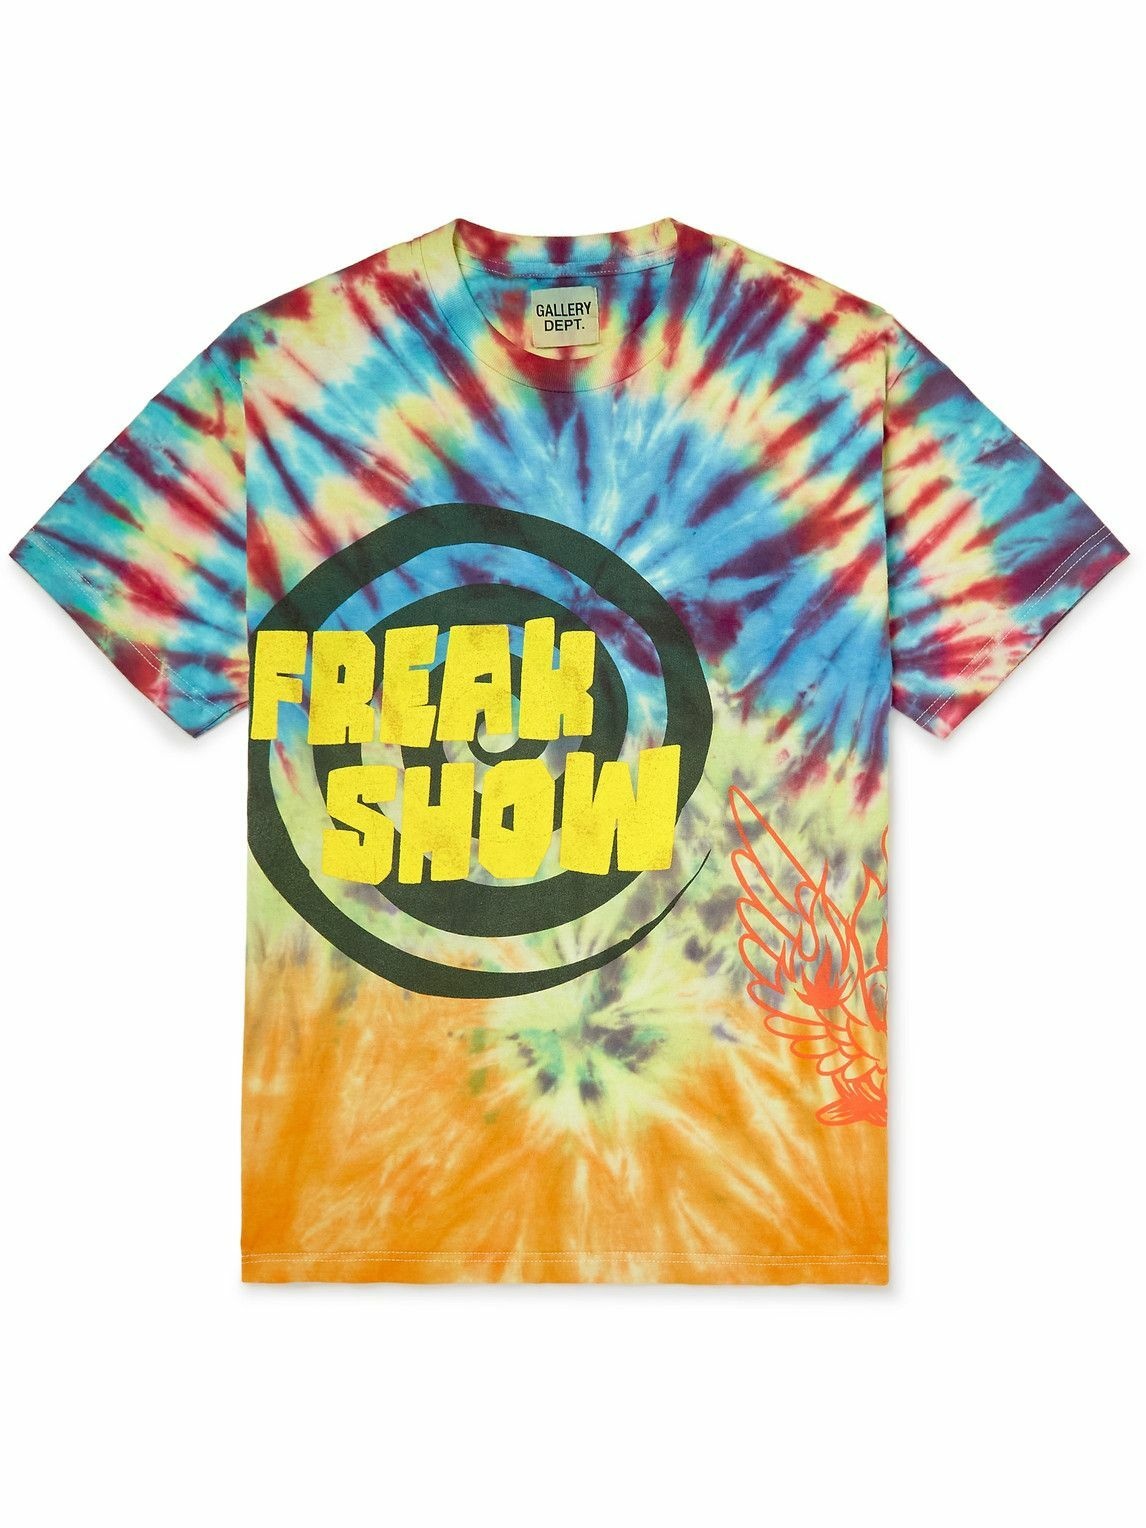 Photo: Gallery Dept. - Freak Show Printed Tie-Dyed Cotton-Jersey T-Shirt - Multi